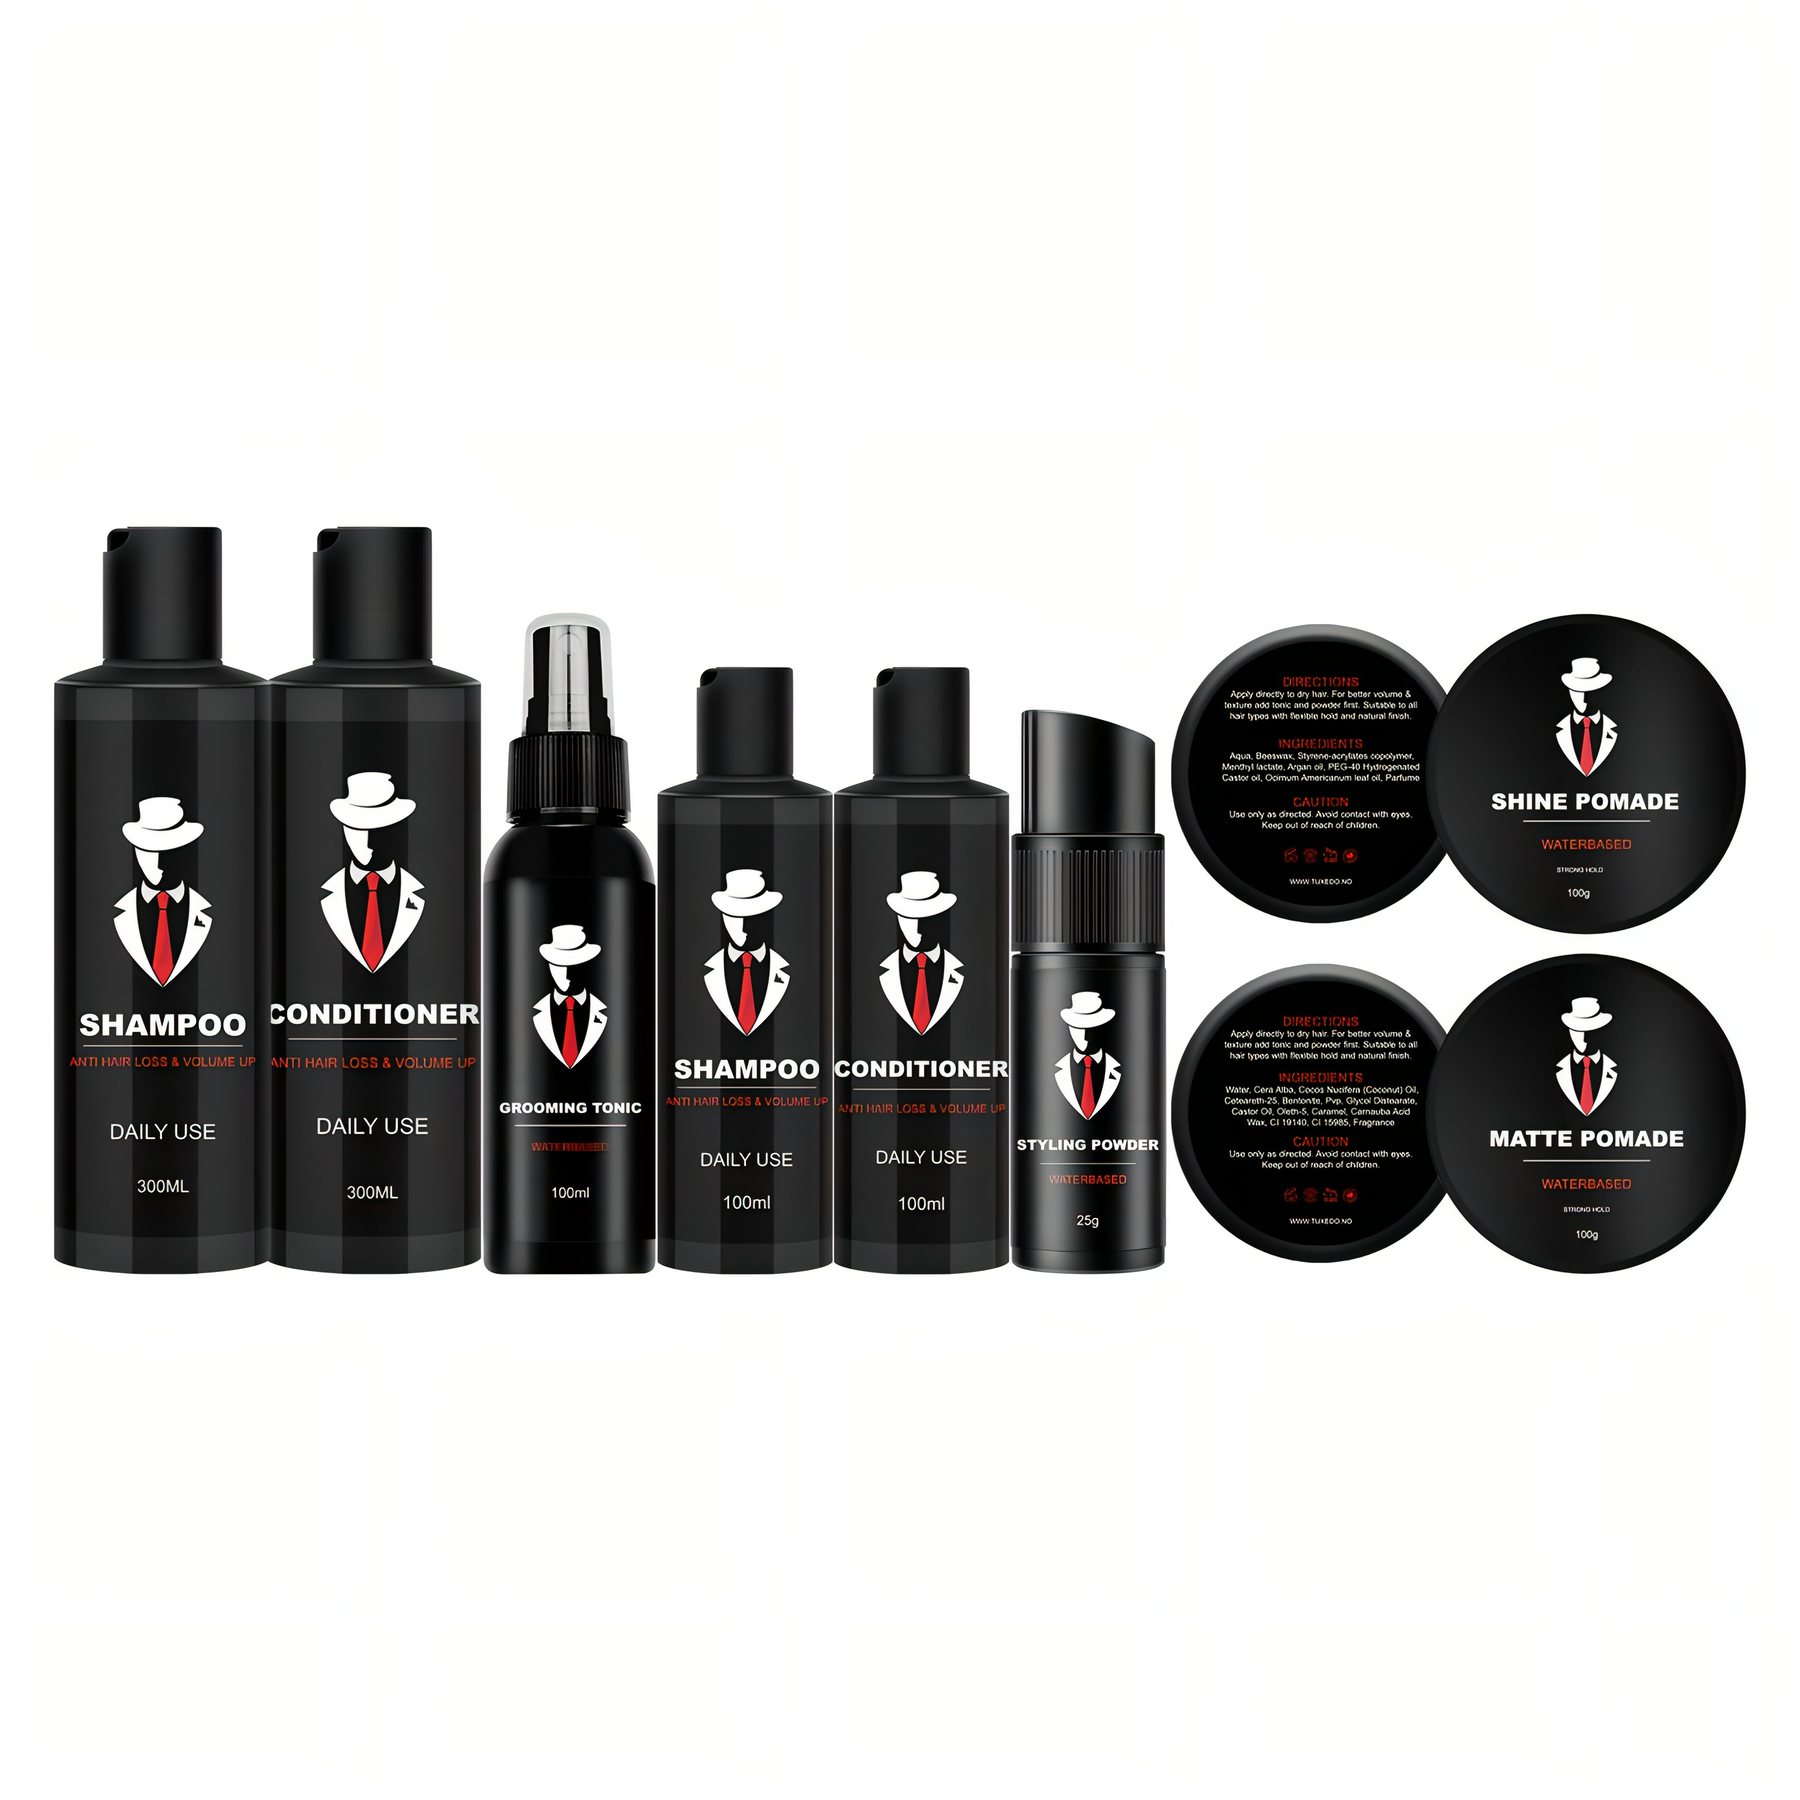 TUXEDO GROOMING PRODUCTS - ON DEMAND BARBERS - OSLO NORWAY